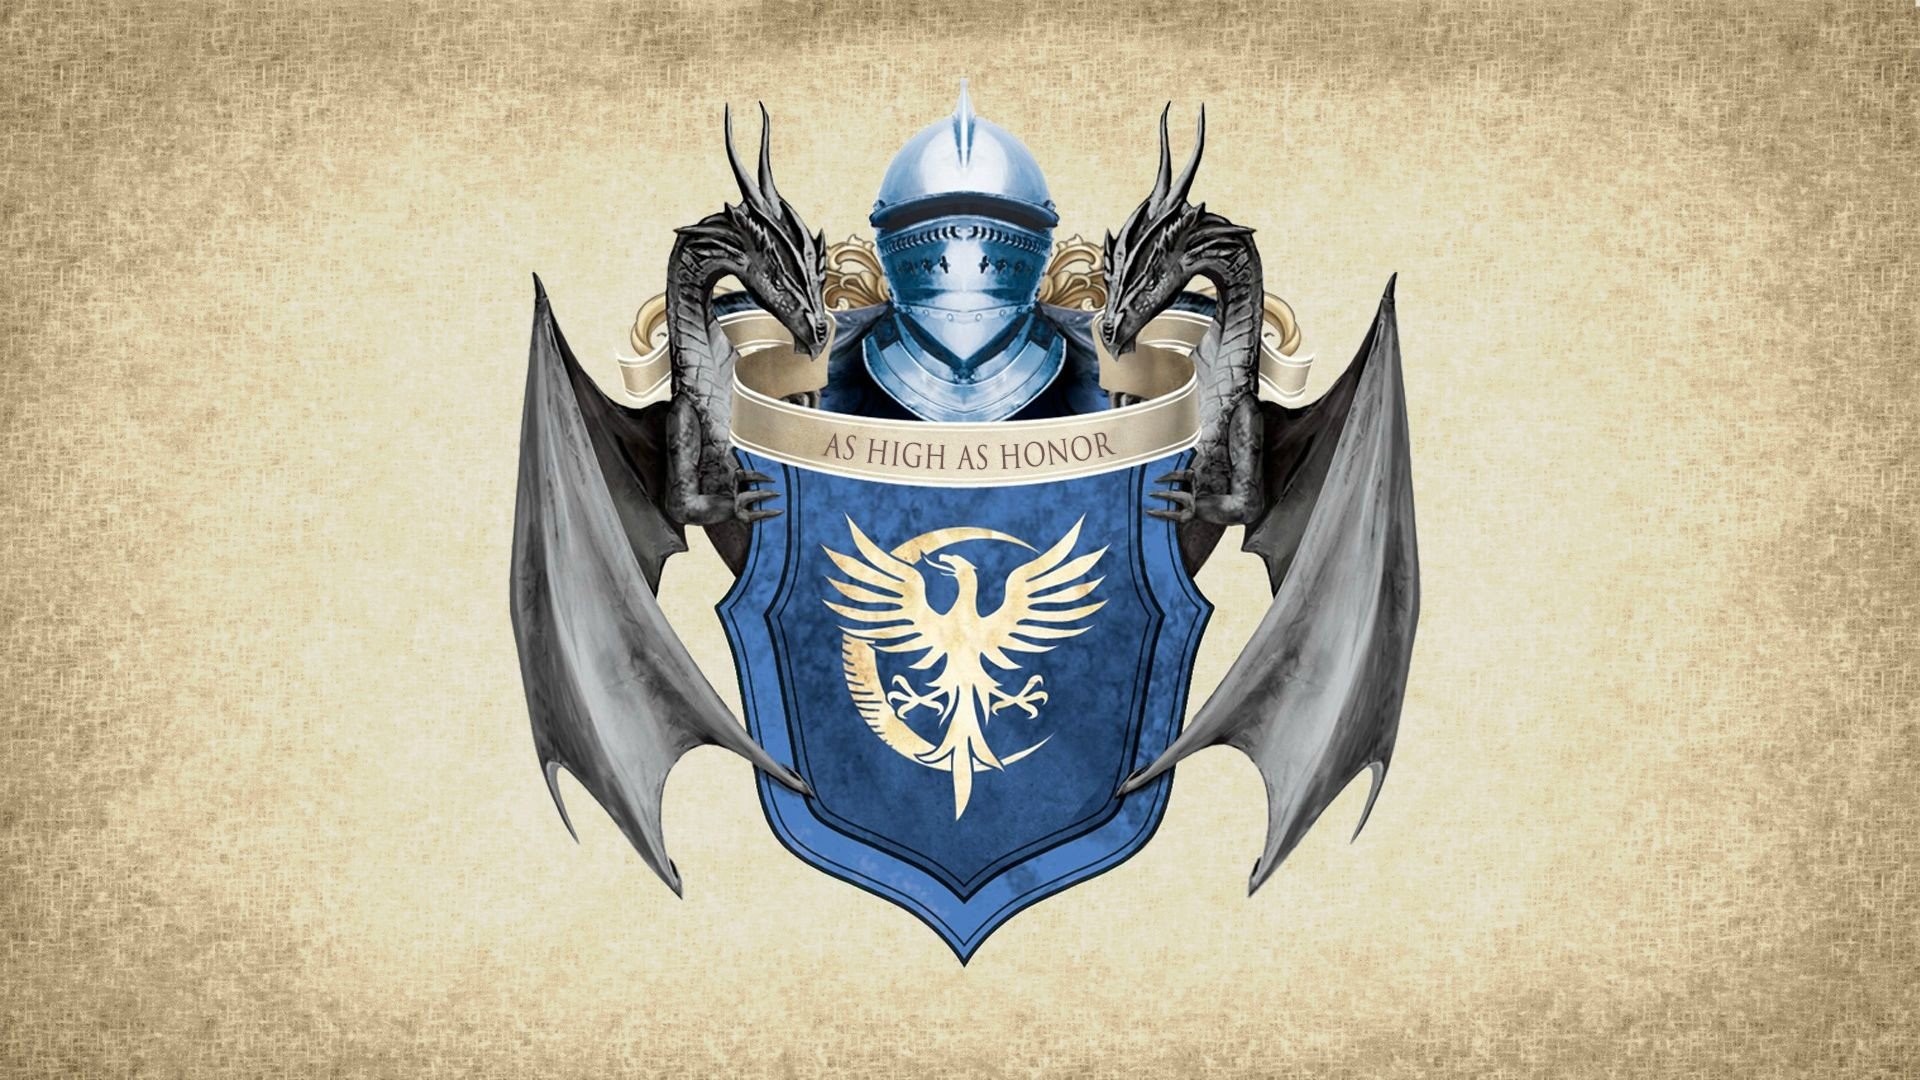 1920x1080 As High Honor A Song Of Ice And Fire Coat Arms Game Thrones House Arryn  Sigil